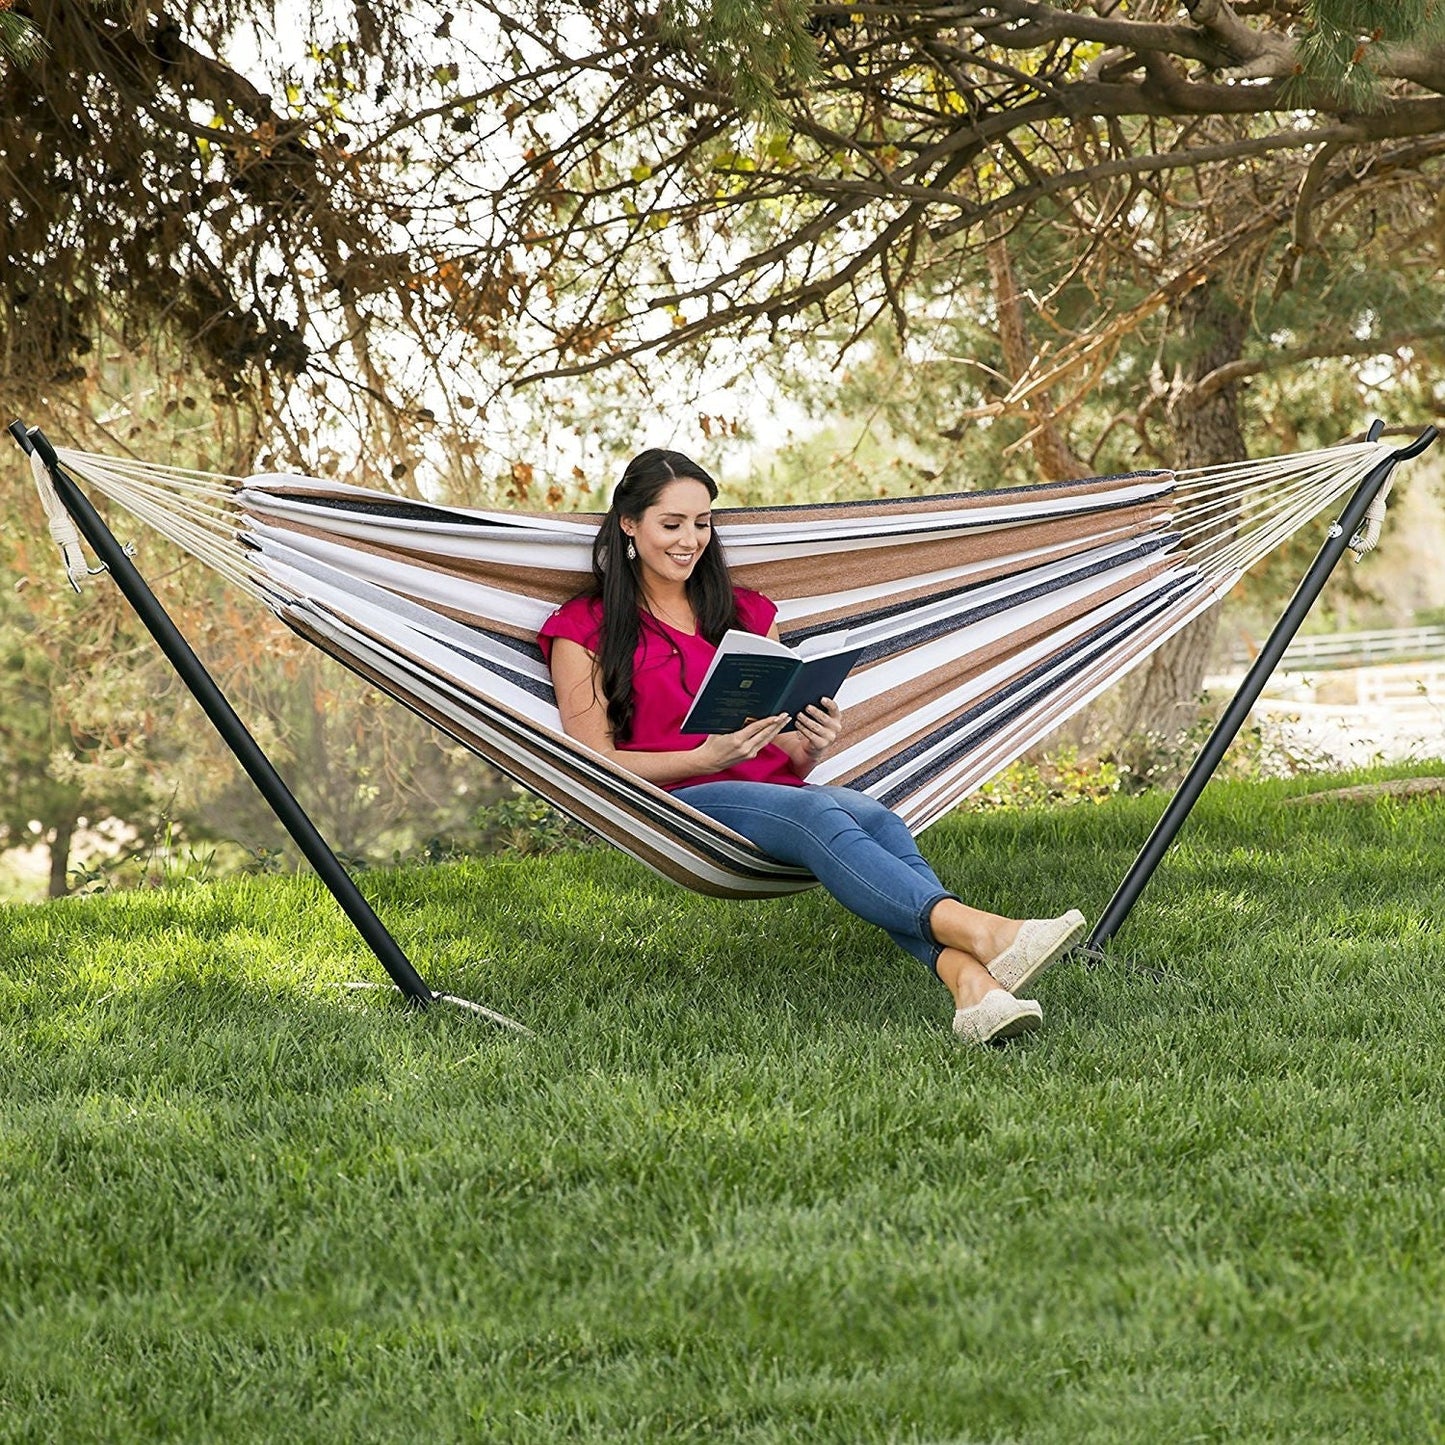 Outdoor > Outdoor Furniture > Hammocks - Portable Cotton Hammock In Desert Strip With Metal Stand And Carry Case